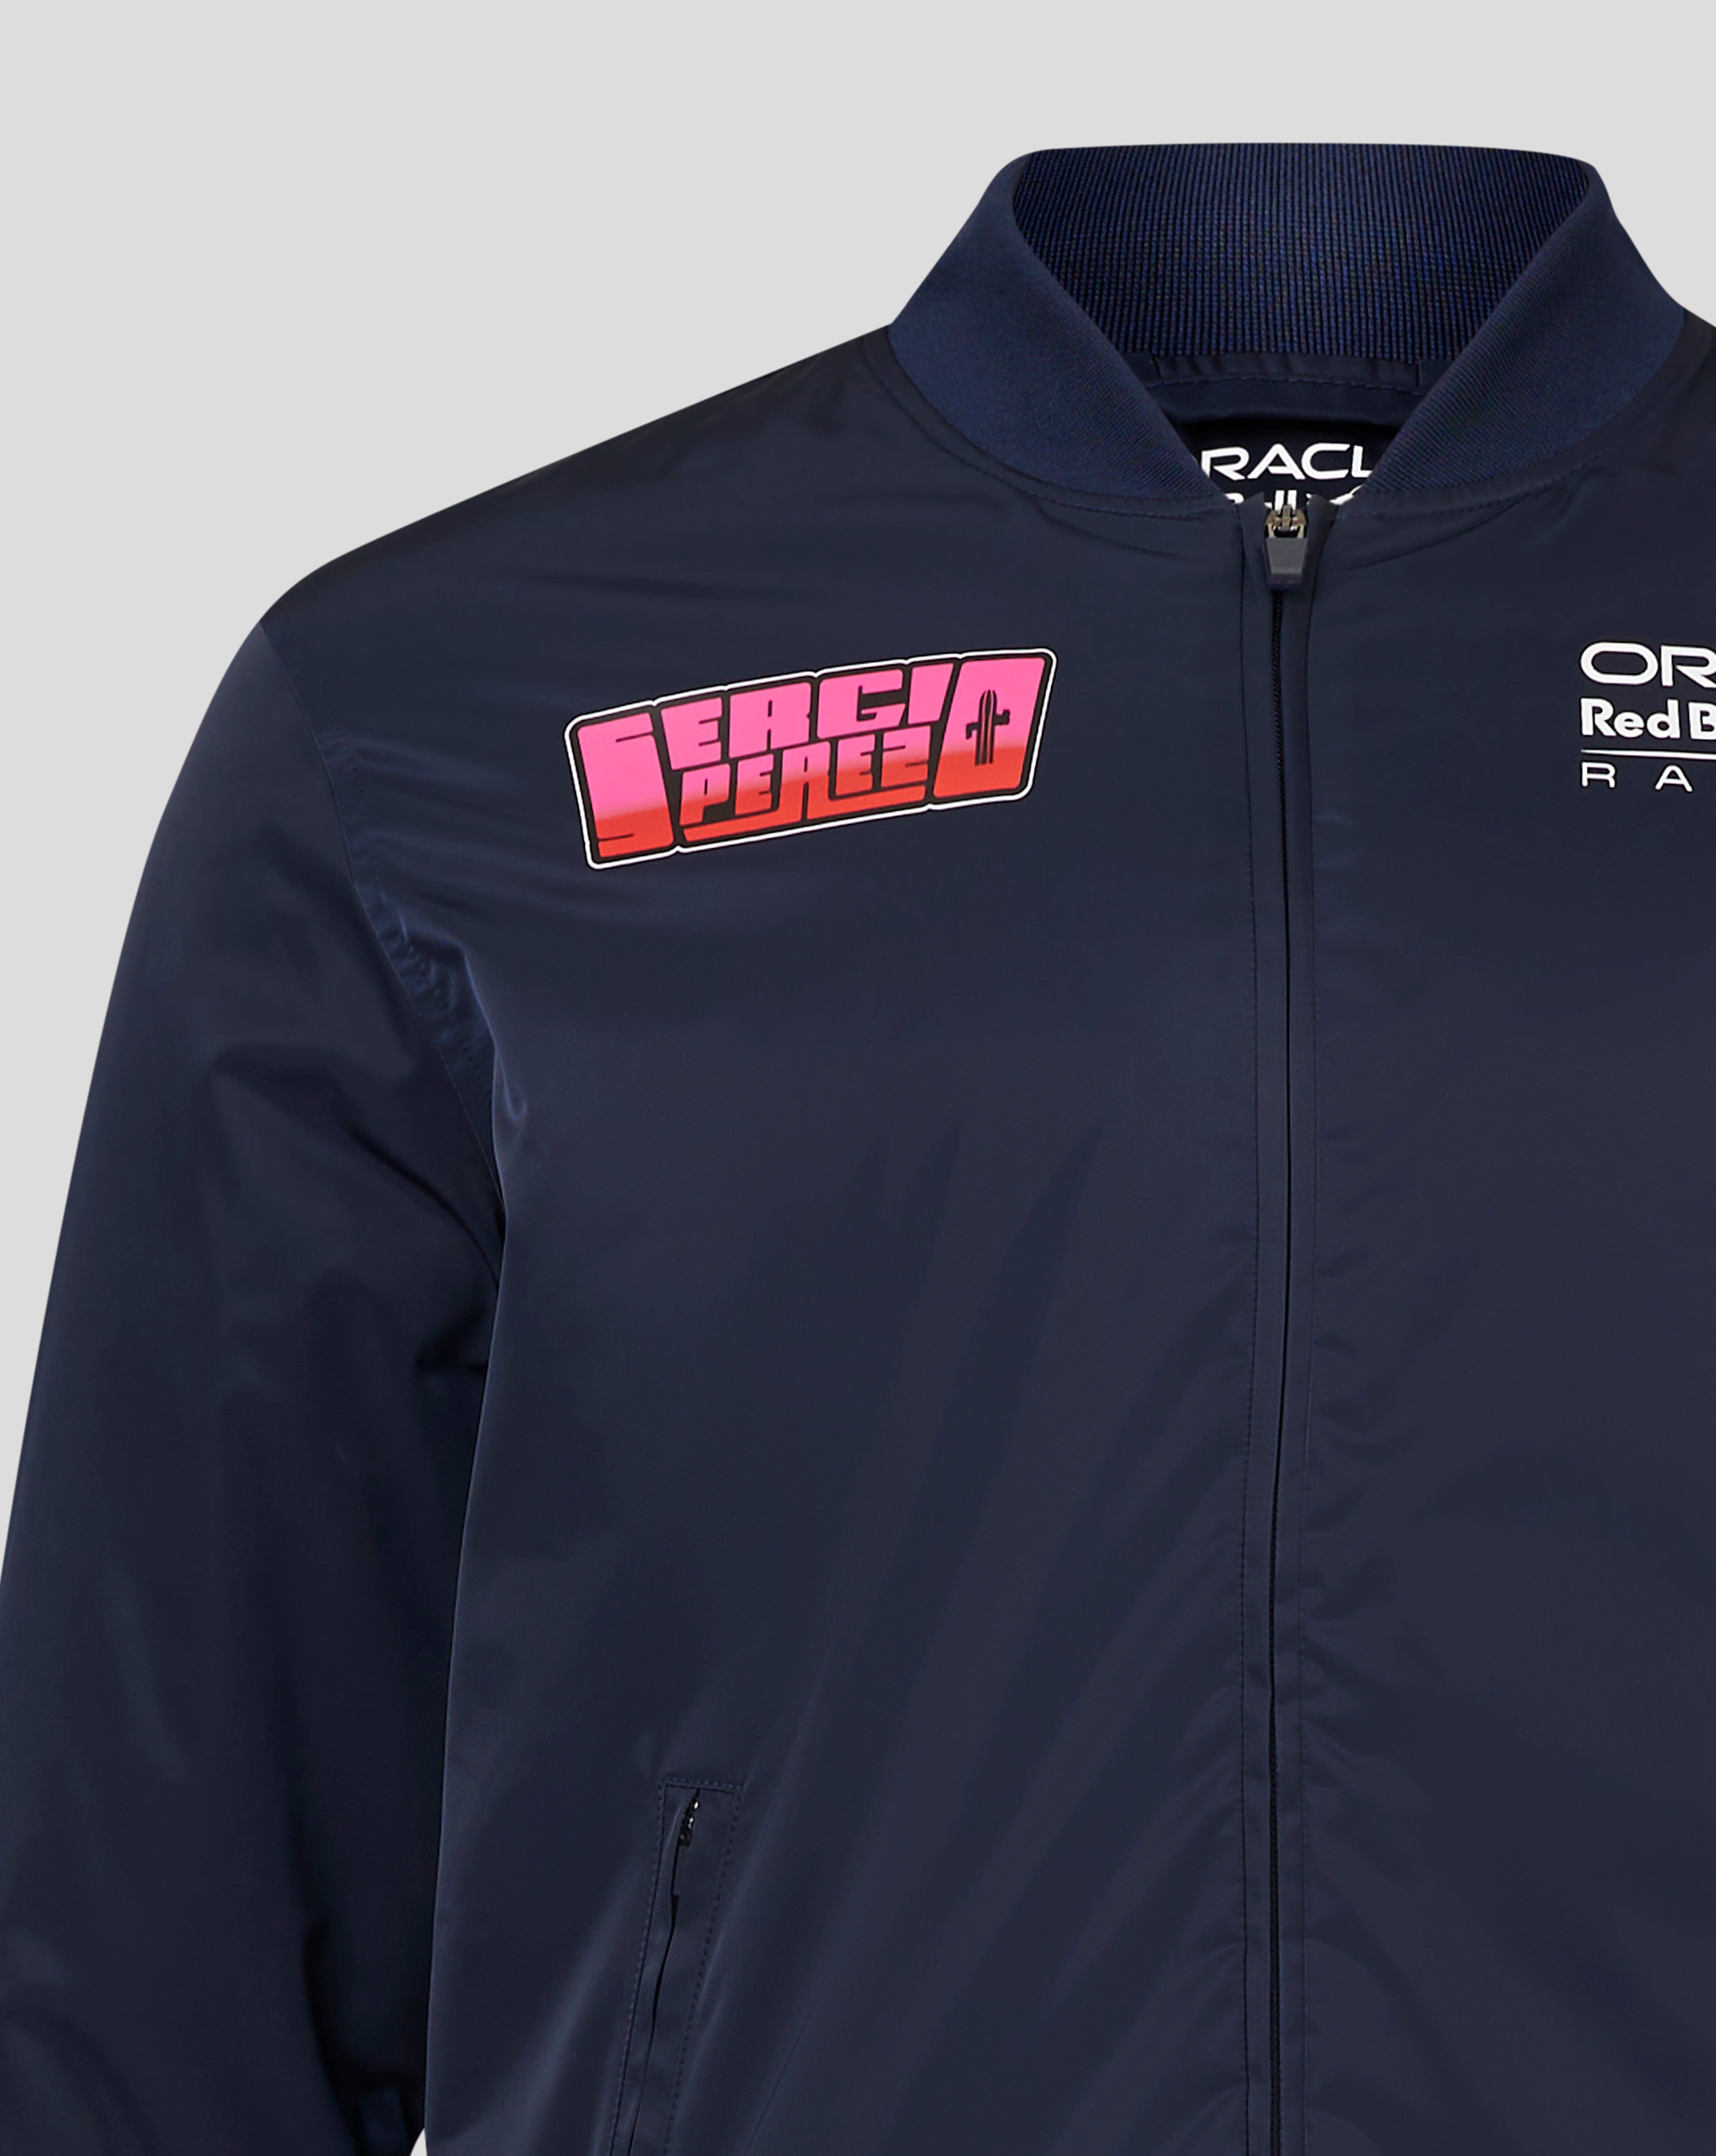 Red Bull Racing F1 Sergio "Checo" Perez Special Edition Mexico GP Track Jacket -Navy